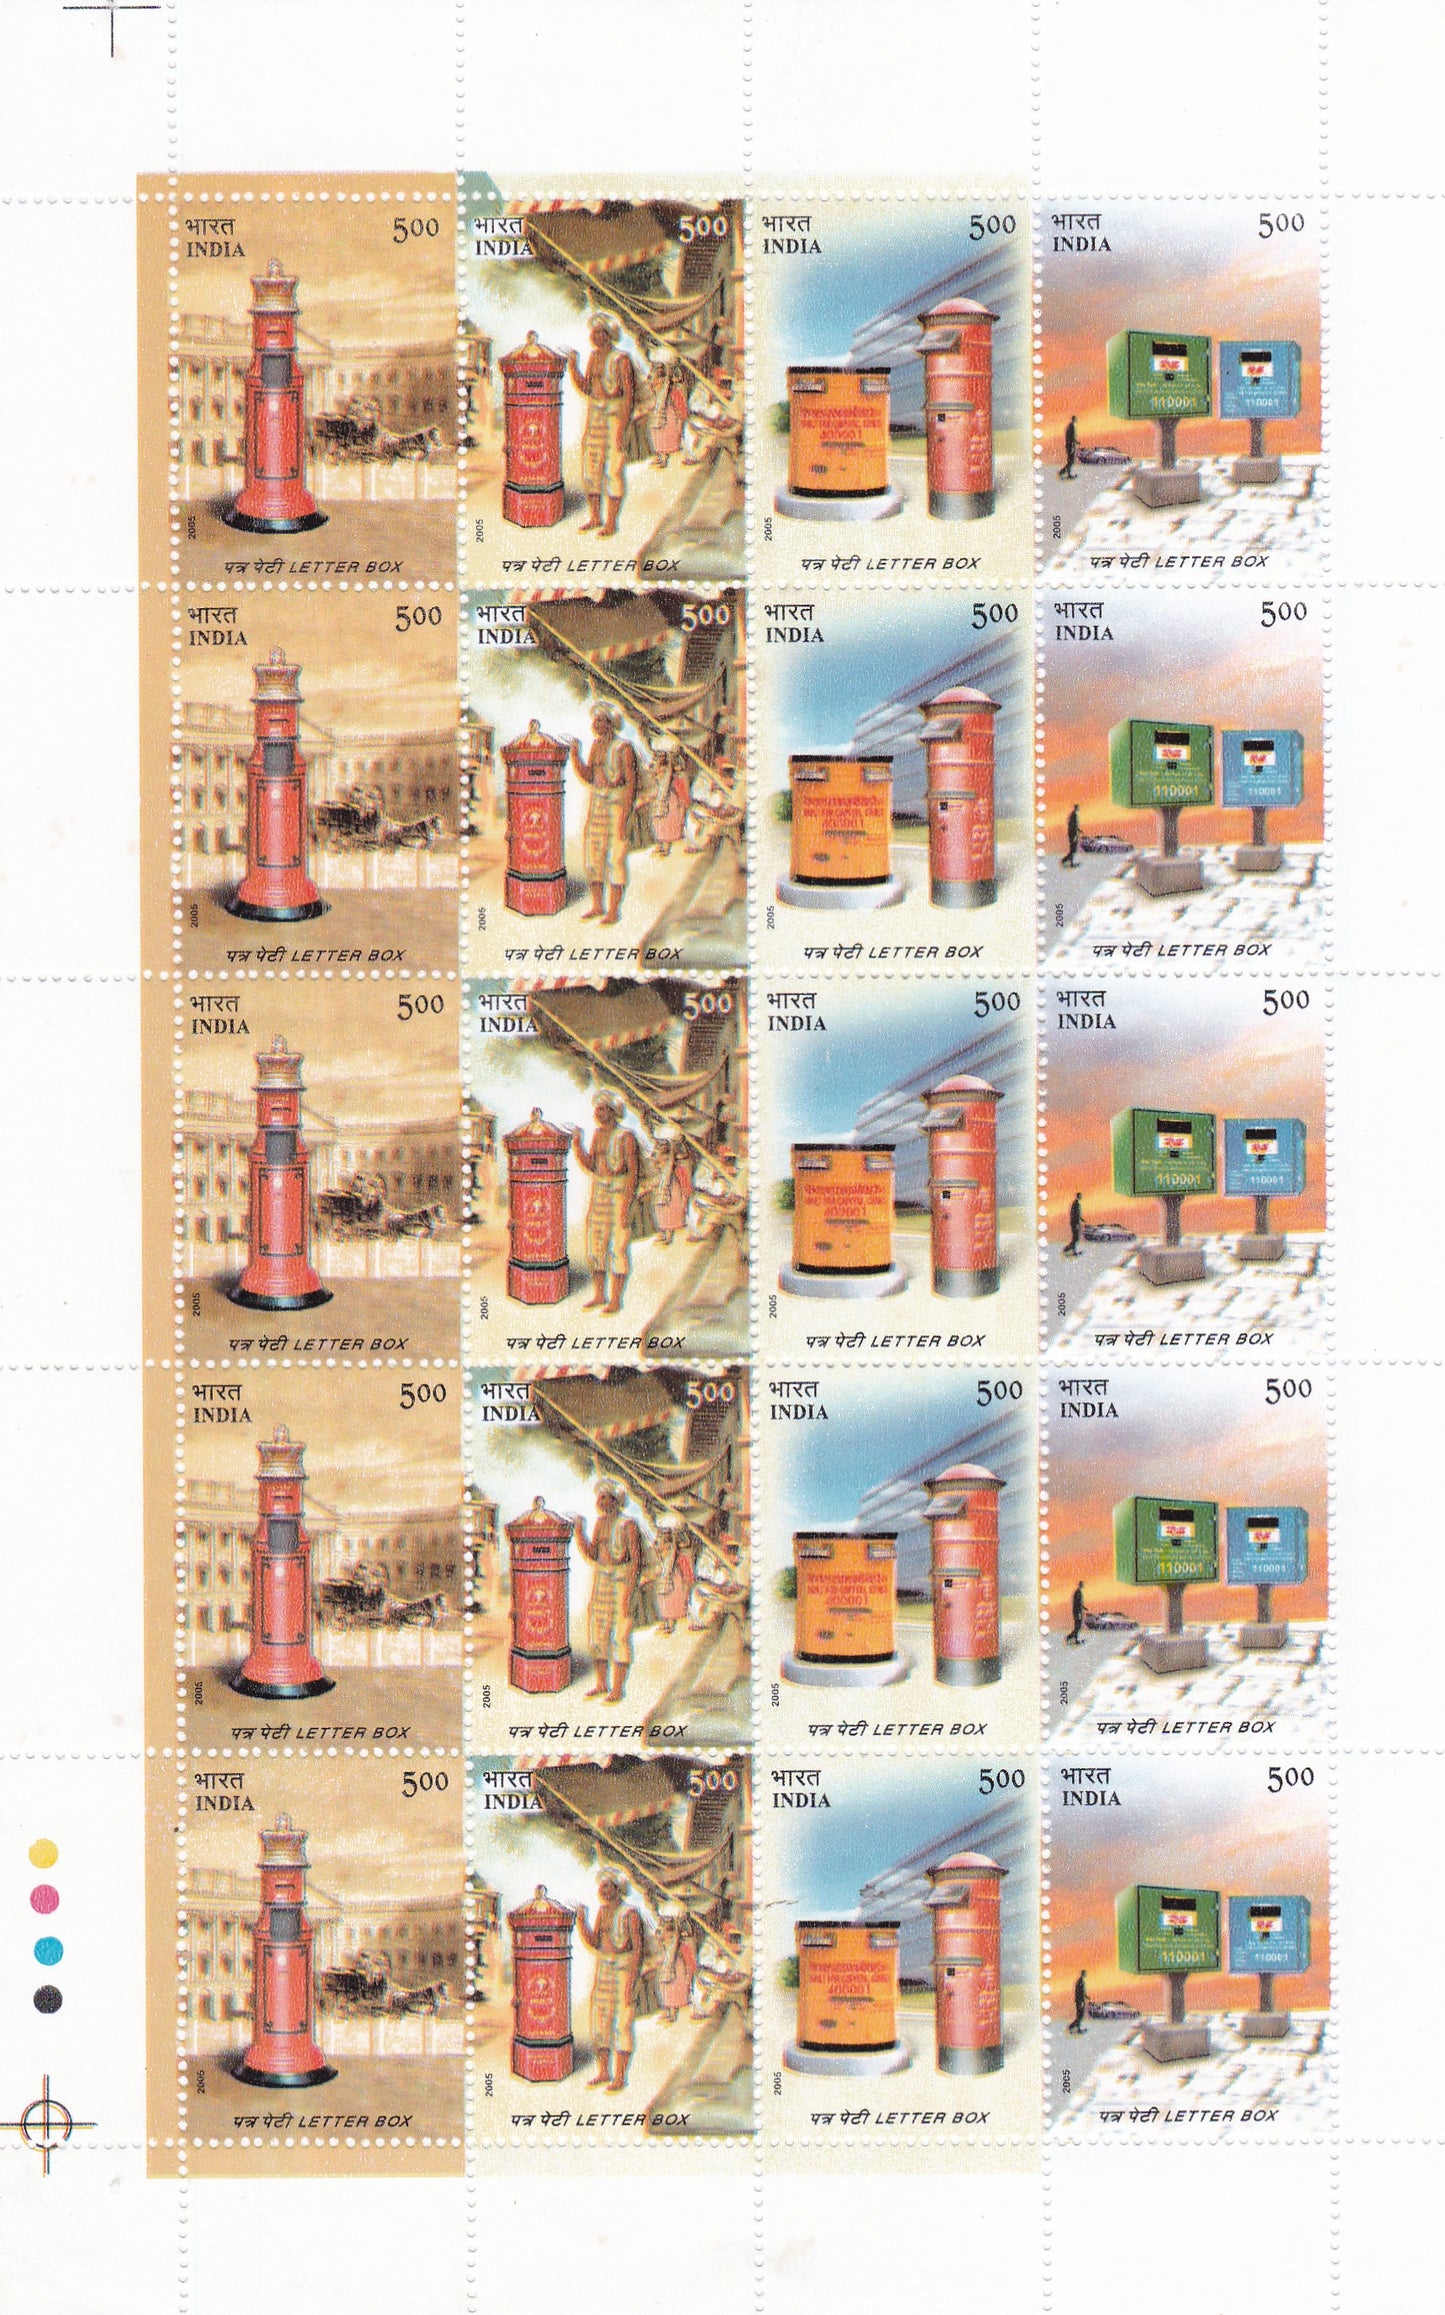 India-Sheetlets 150 Years of Indian Post